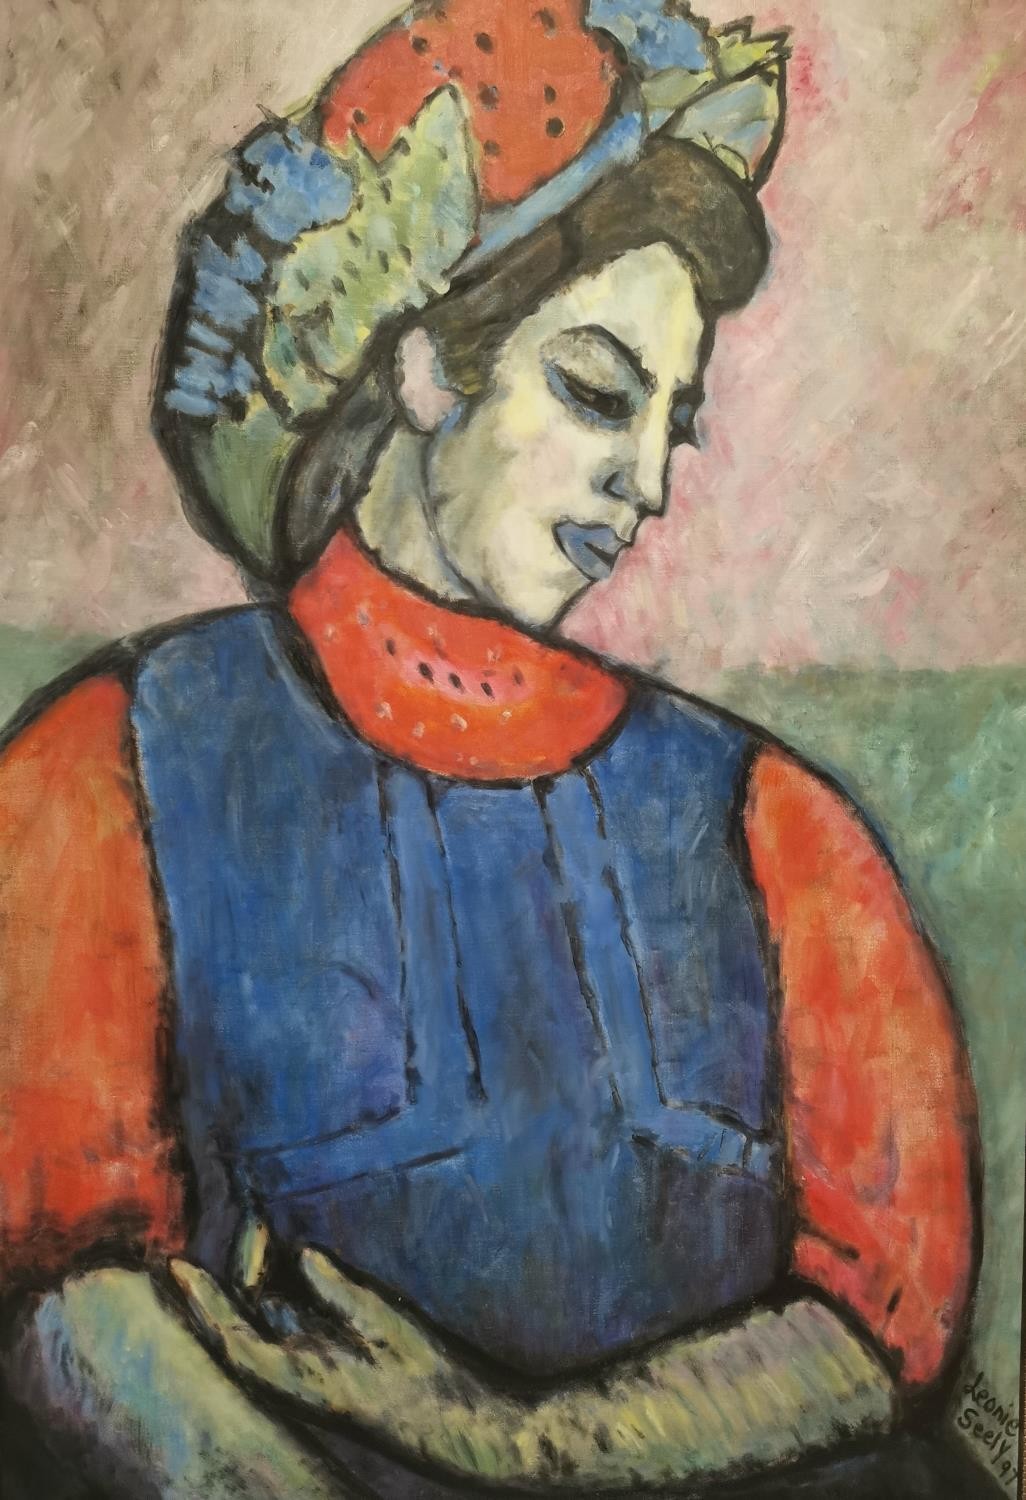 After Alexej von Jawlensky, Russian (1864 - 1941), an oil on canvas depicting a lady wearing a fruit